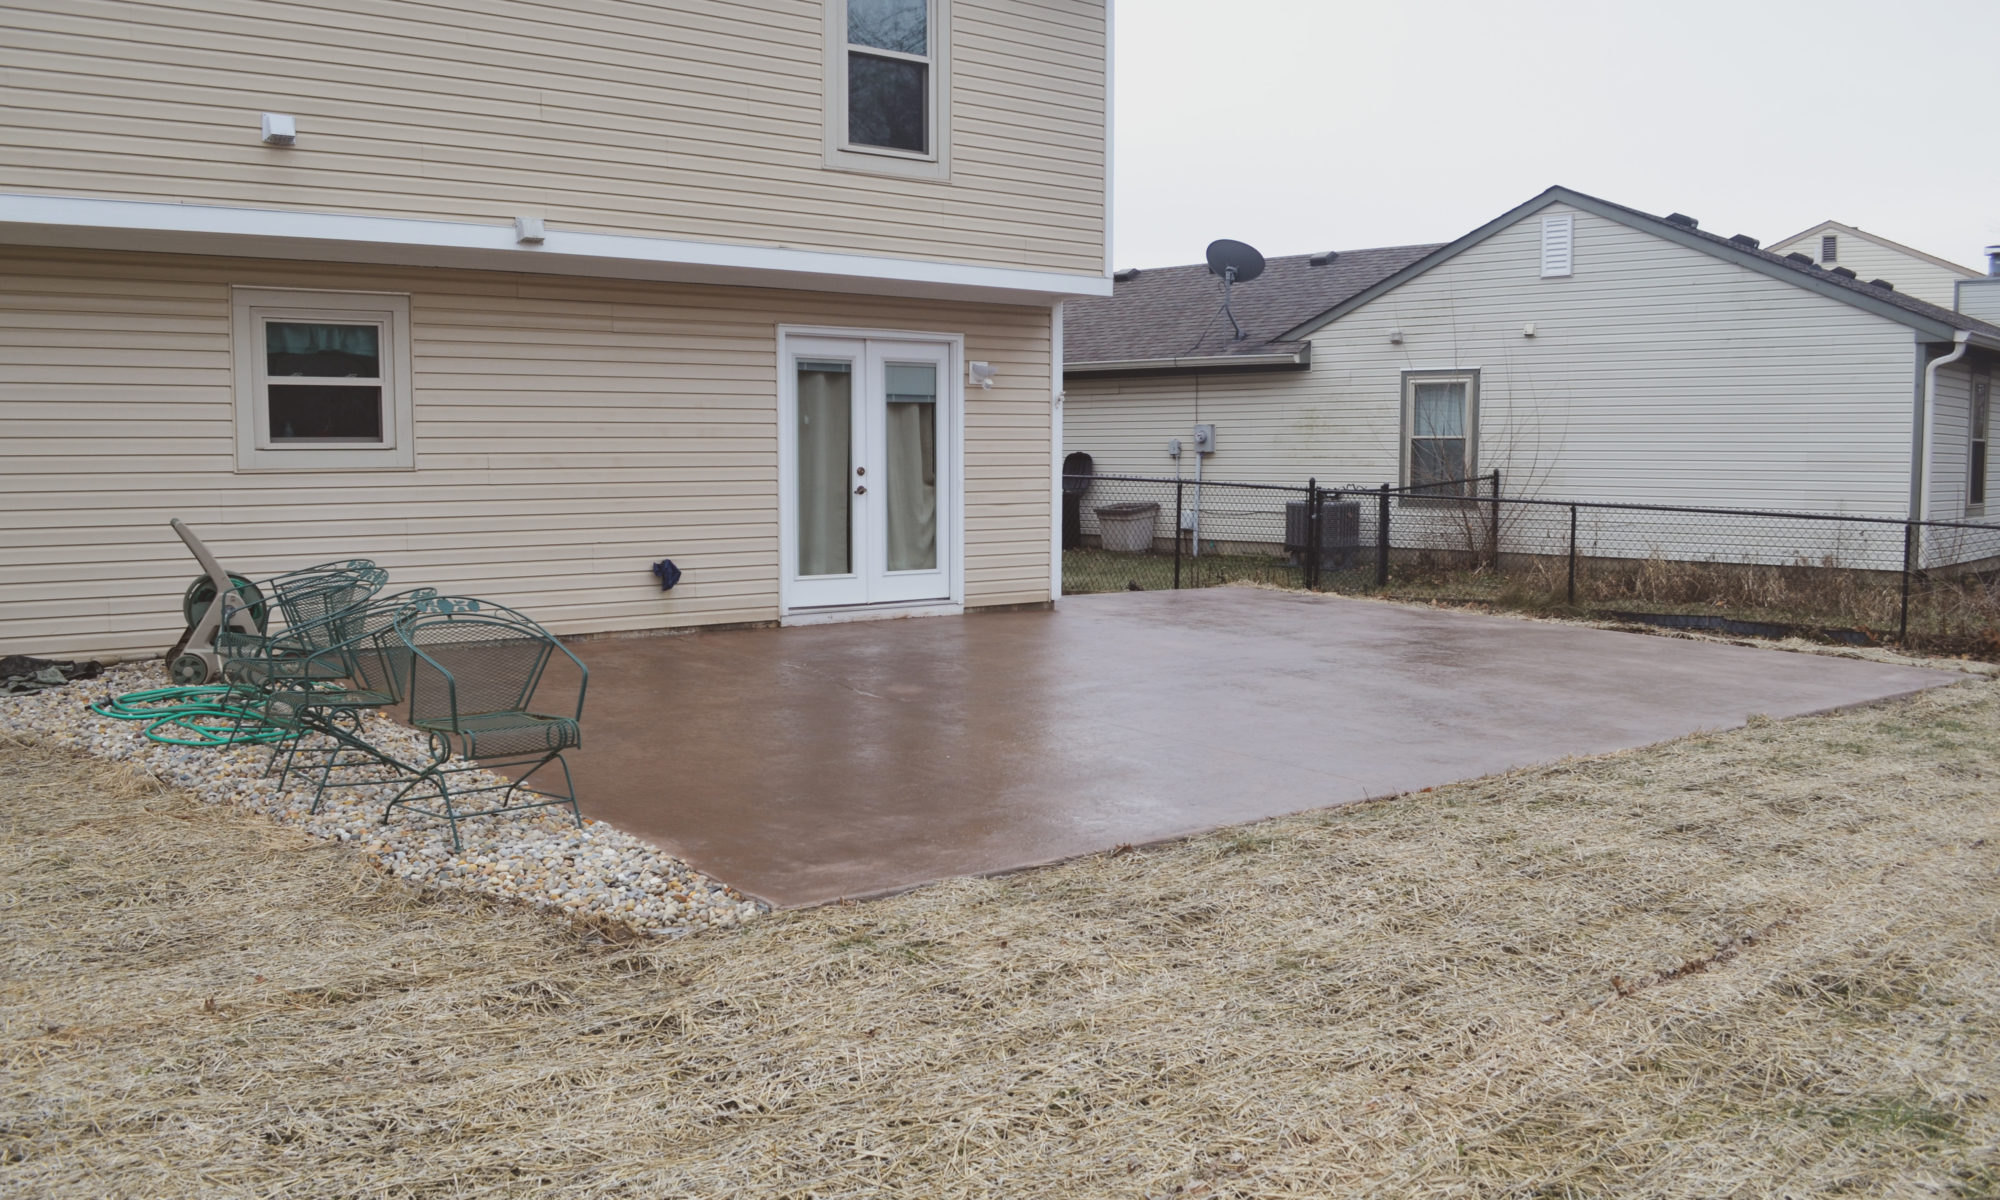 Precision Outdoors Fishers Stamped Concrete Patio Orange Brown simple boring Indiana Backyard